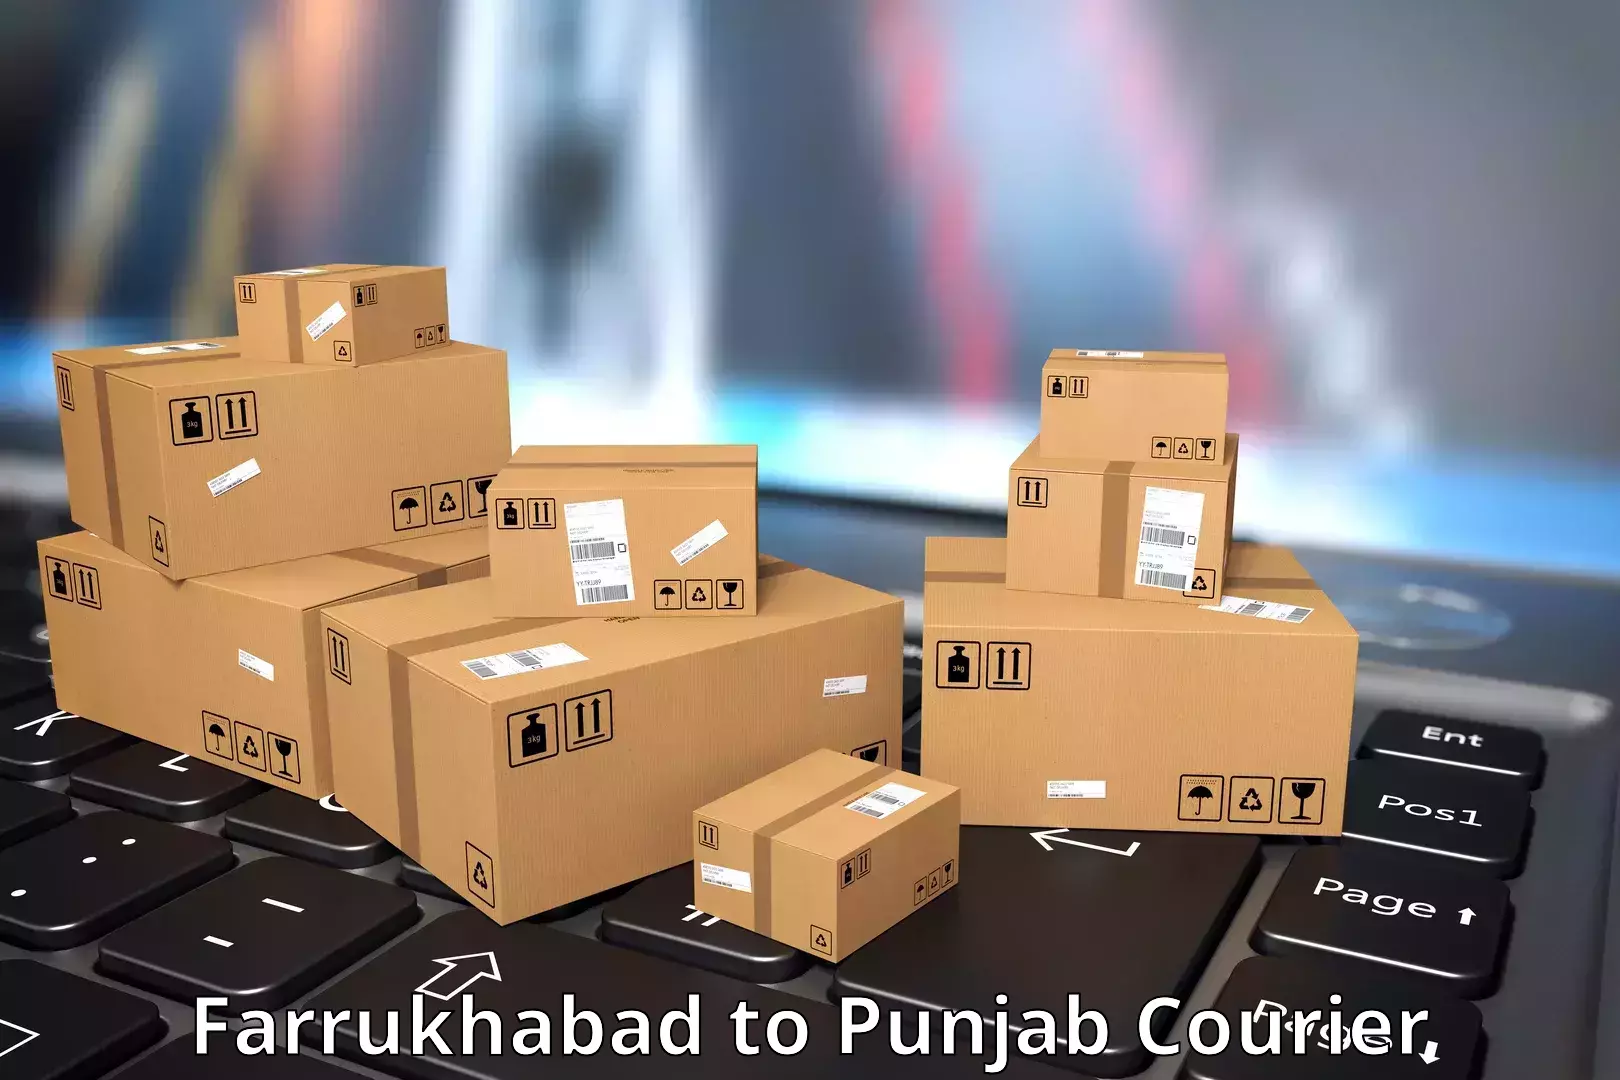 Next-generation courier services Farrukhabad to Amritsar